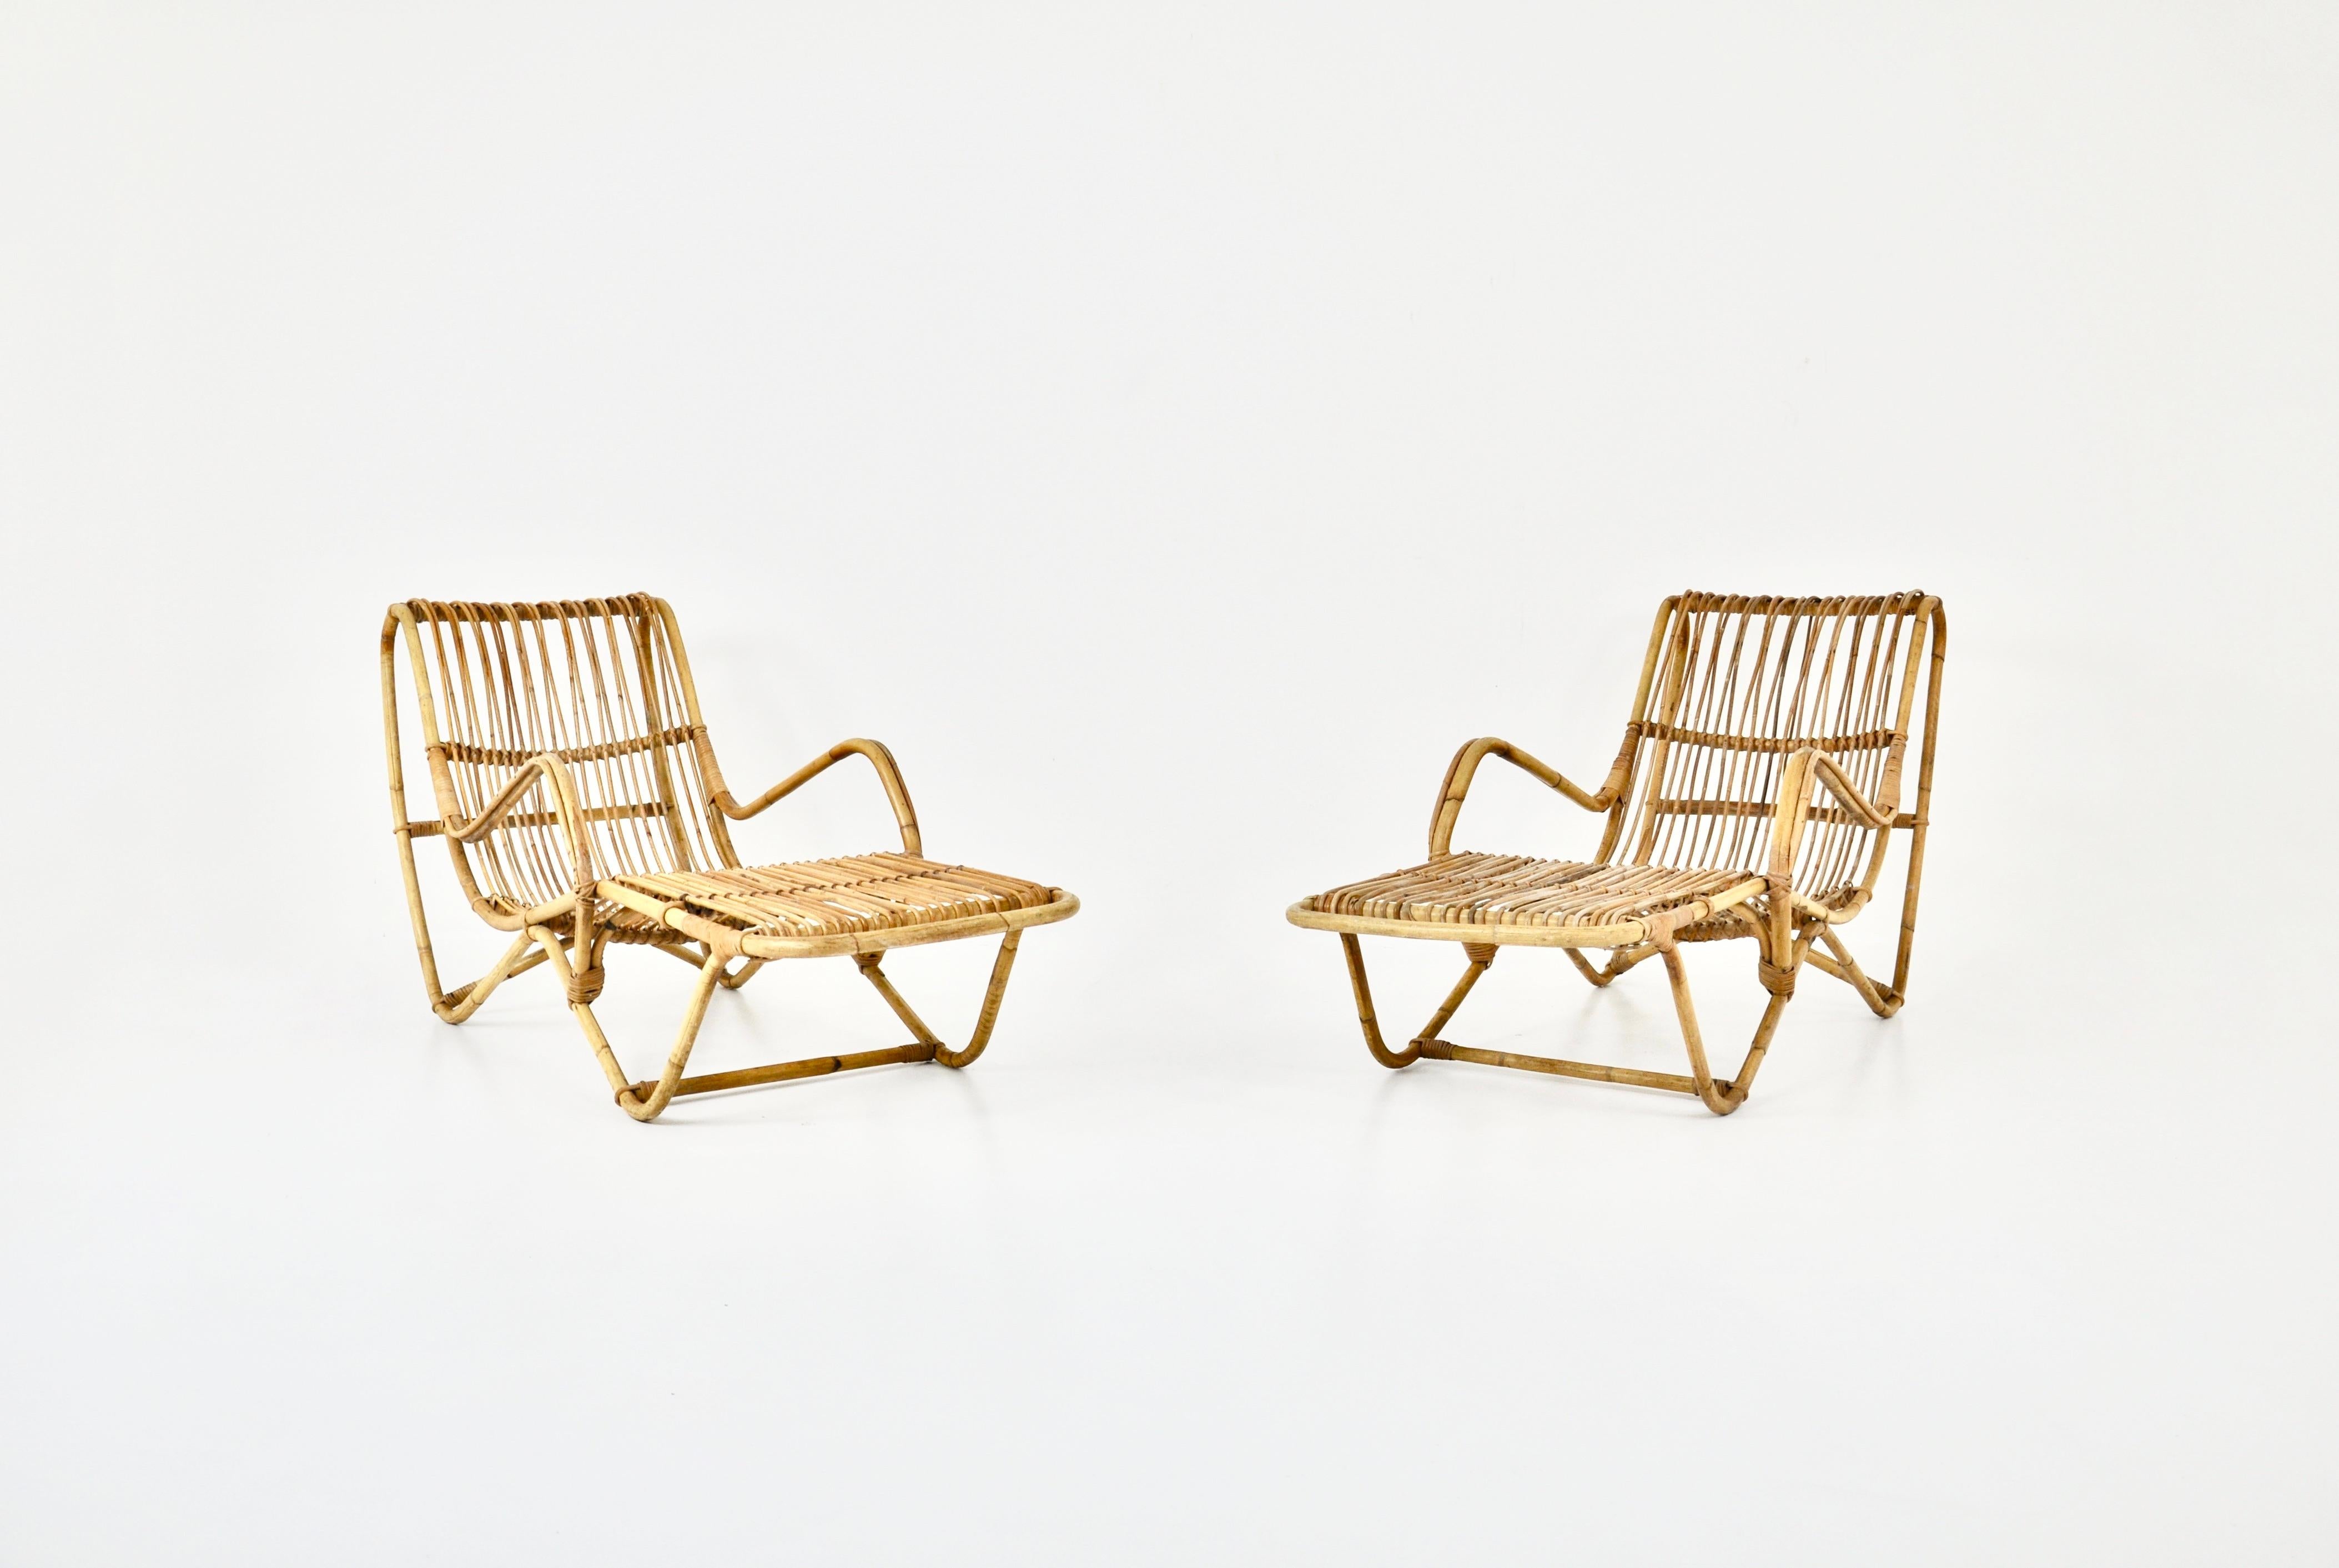 Pair of lounge chairs in rattan. Seat height: 22cm. Wear and tear due to time and age.